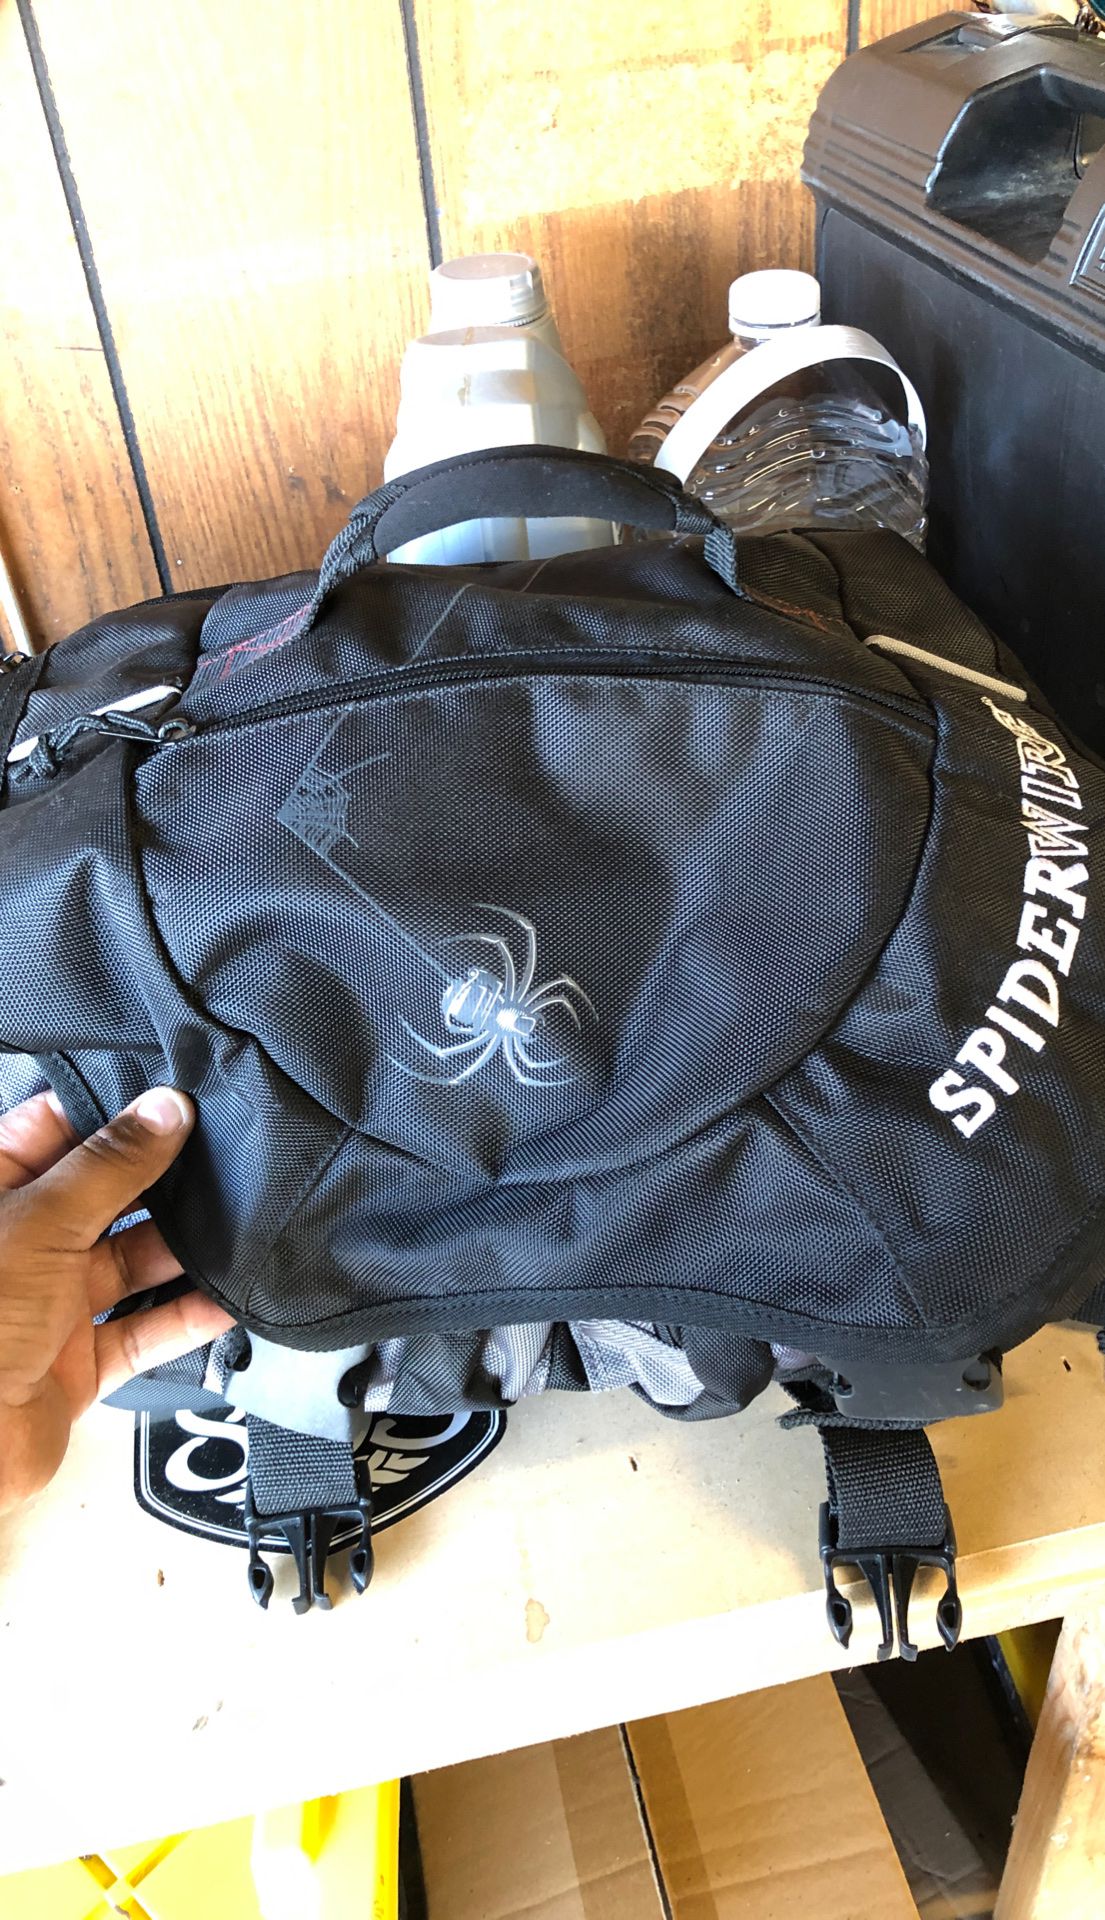 Spider wire tackle bag